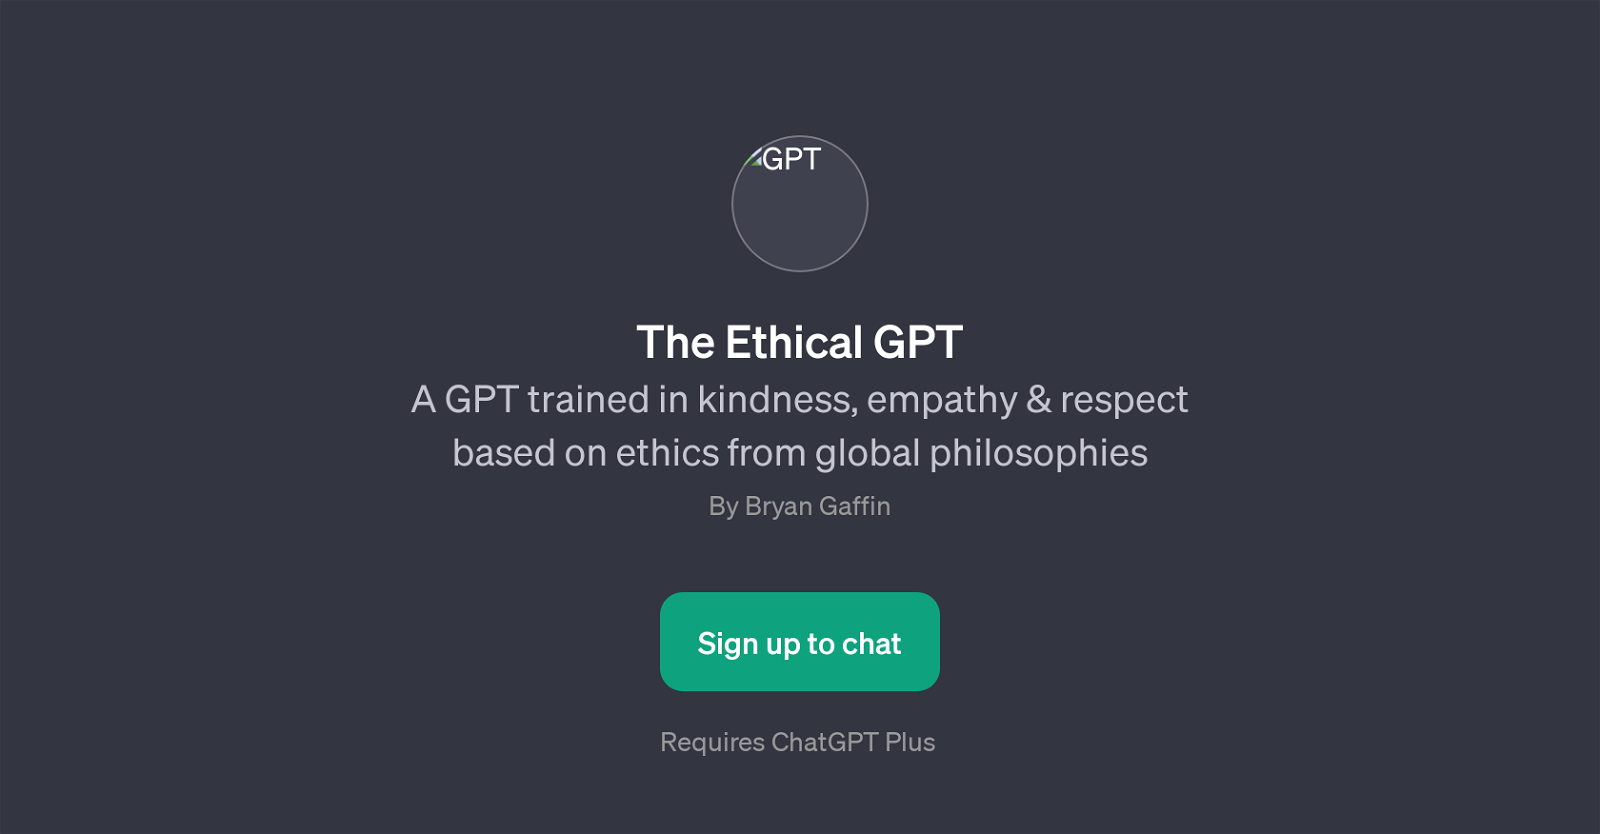 The Ethical GPT website